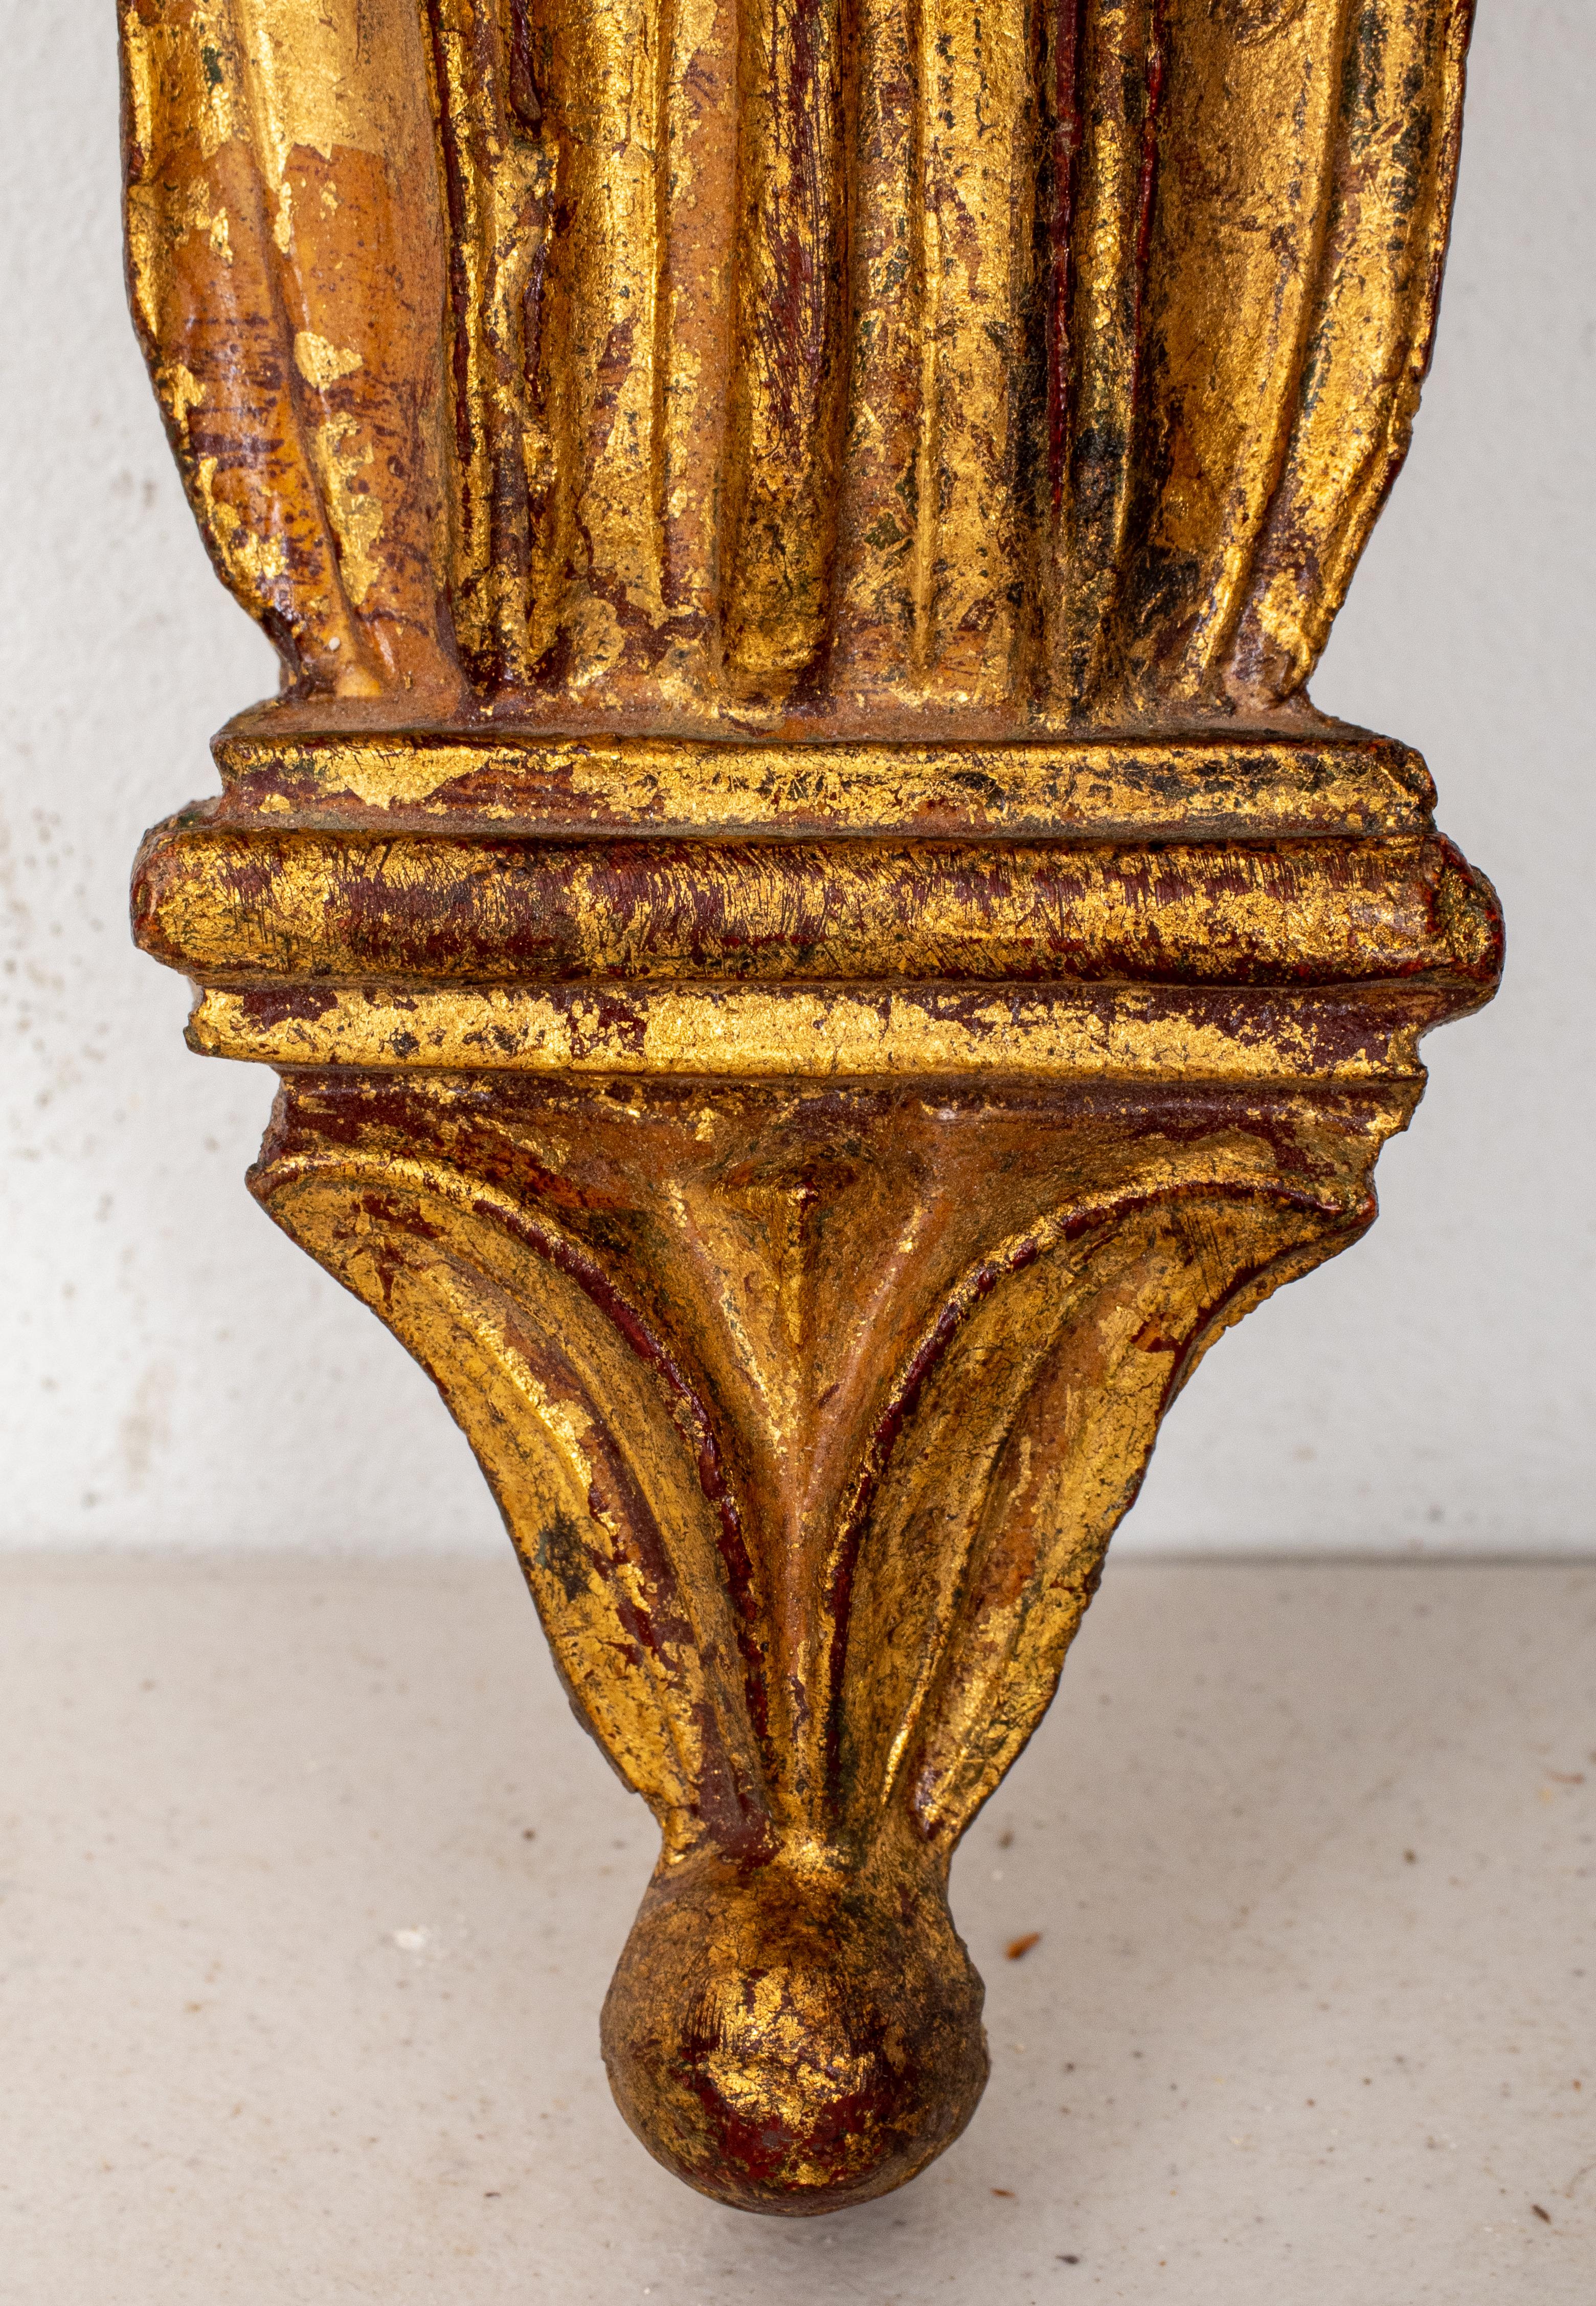 Hollywood Regency giltwood bracket, with molded shaped bracket above a modified scrolling Corinthian capital terminating in a pendant finial. 
Measures: 10.5